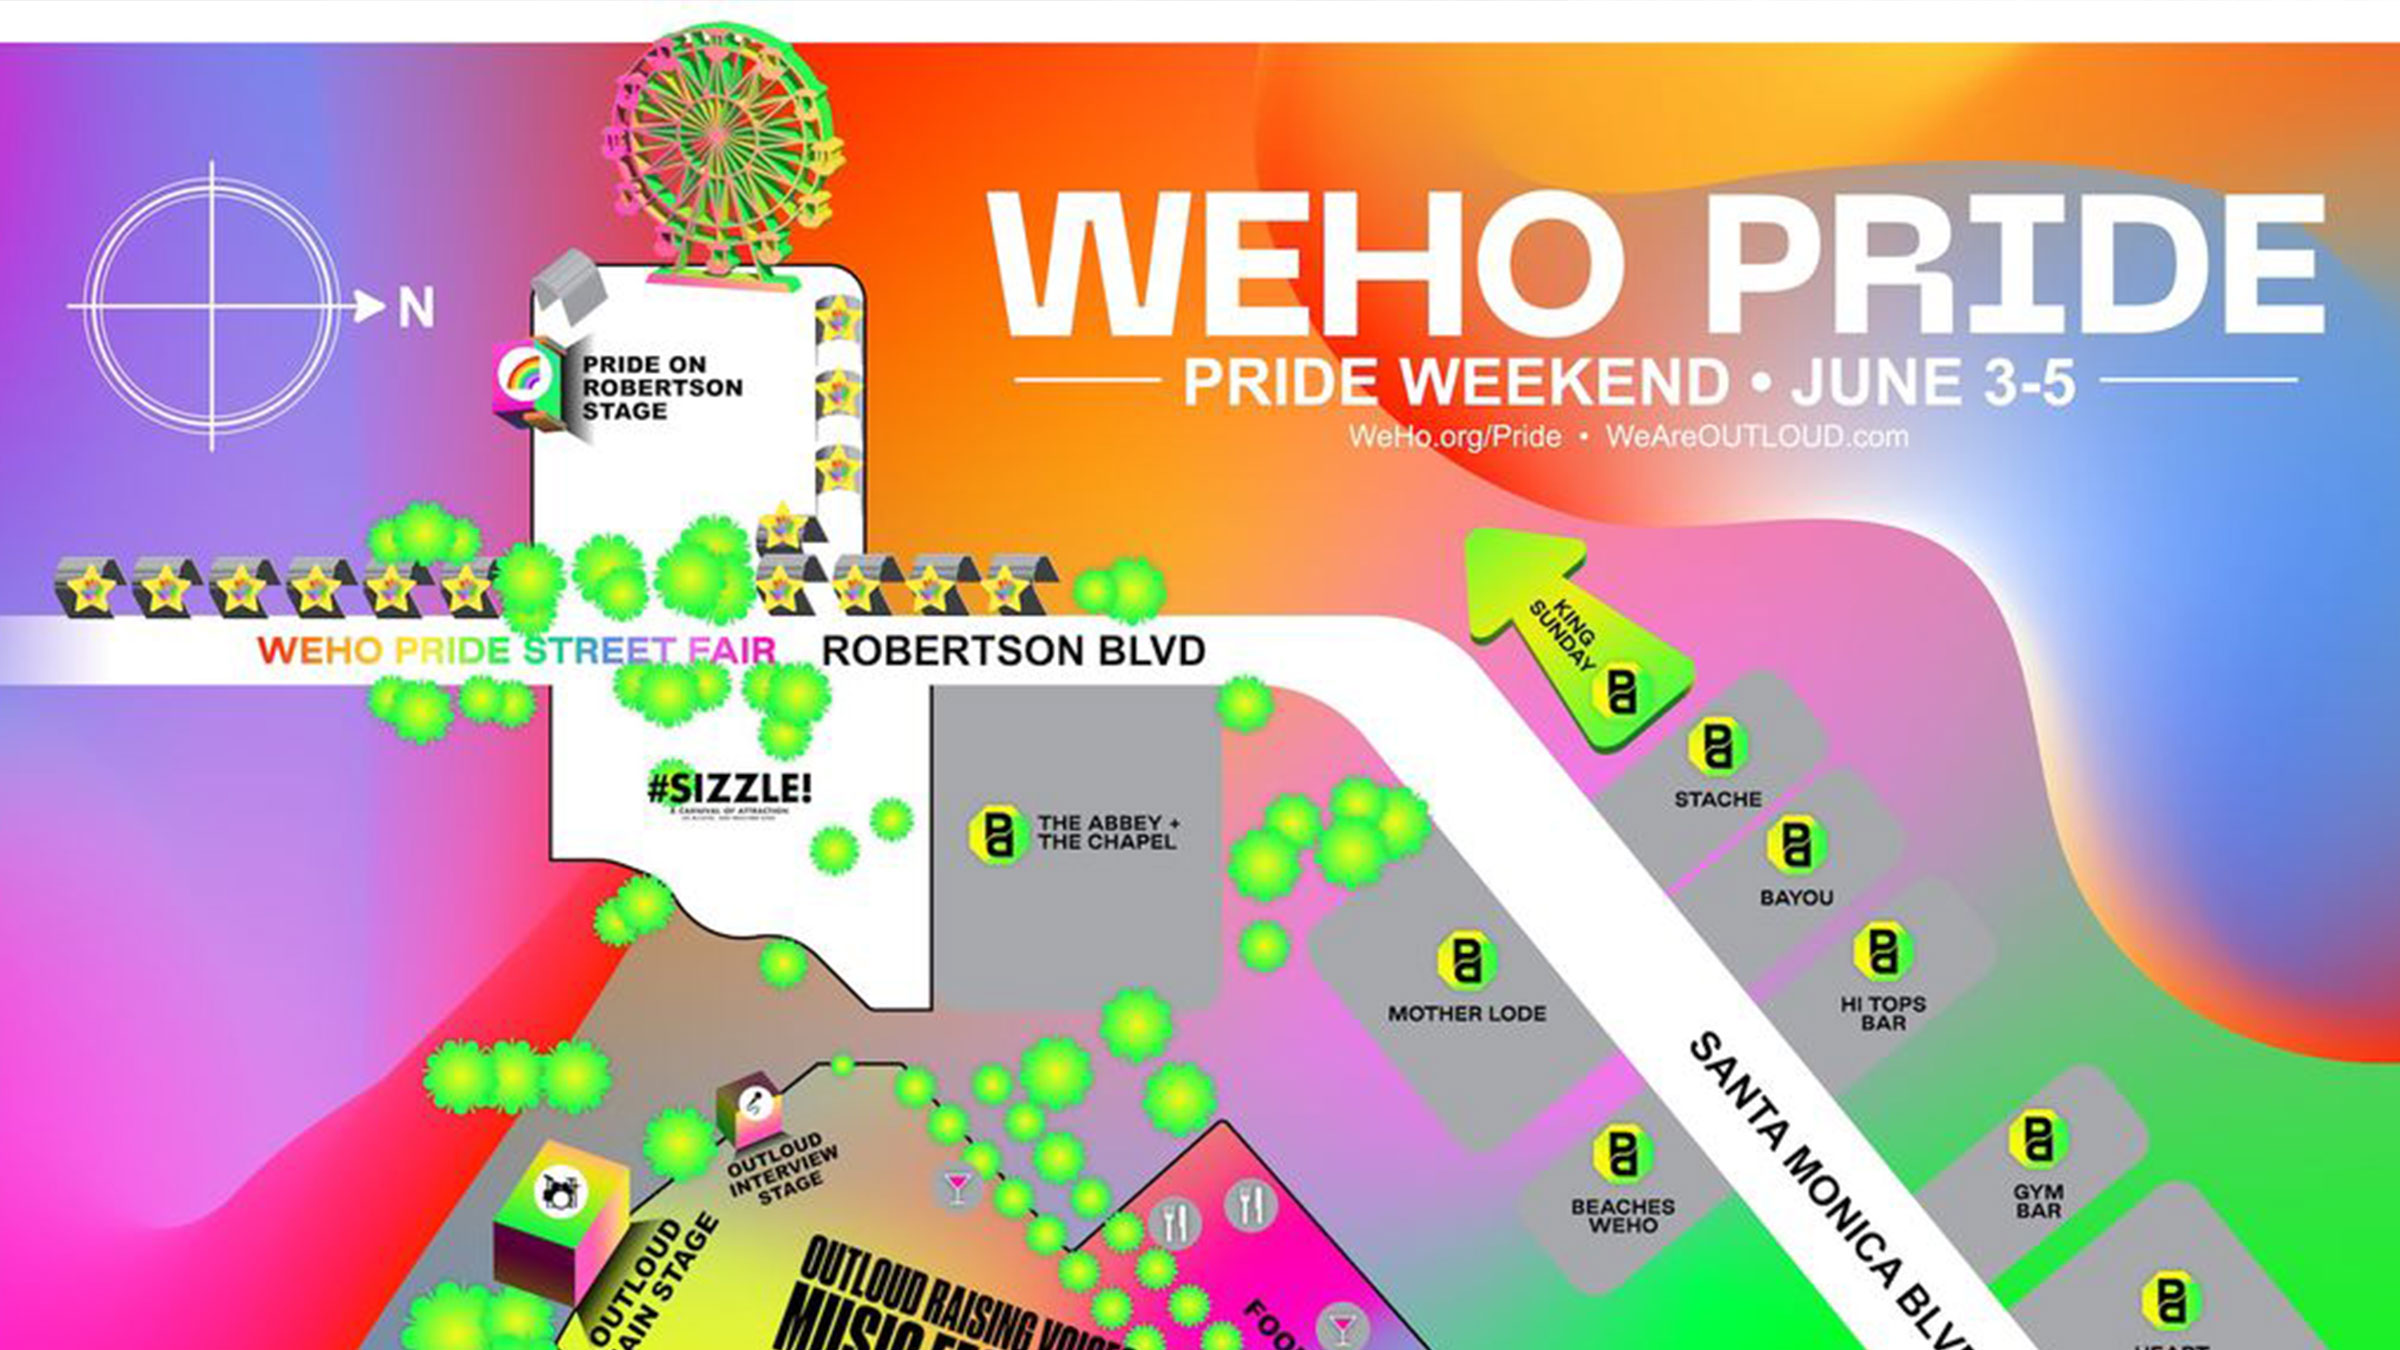 Check out the WeHo Pride map WEHOville